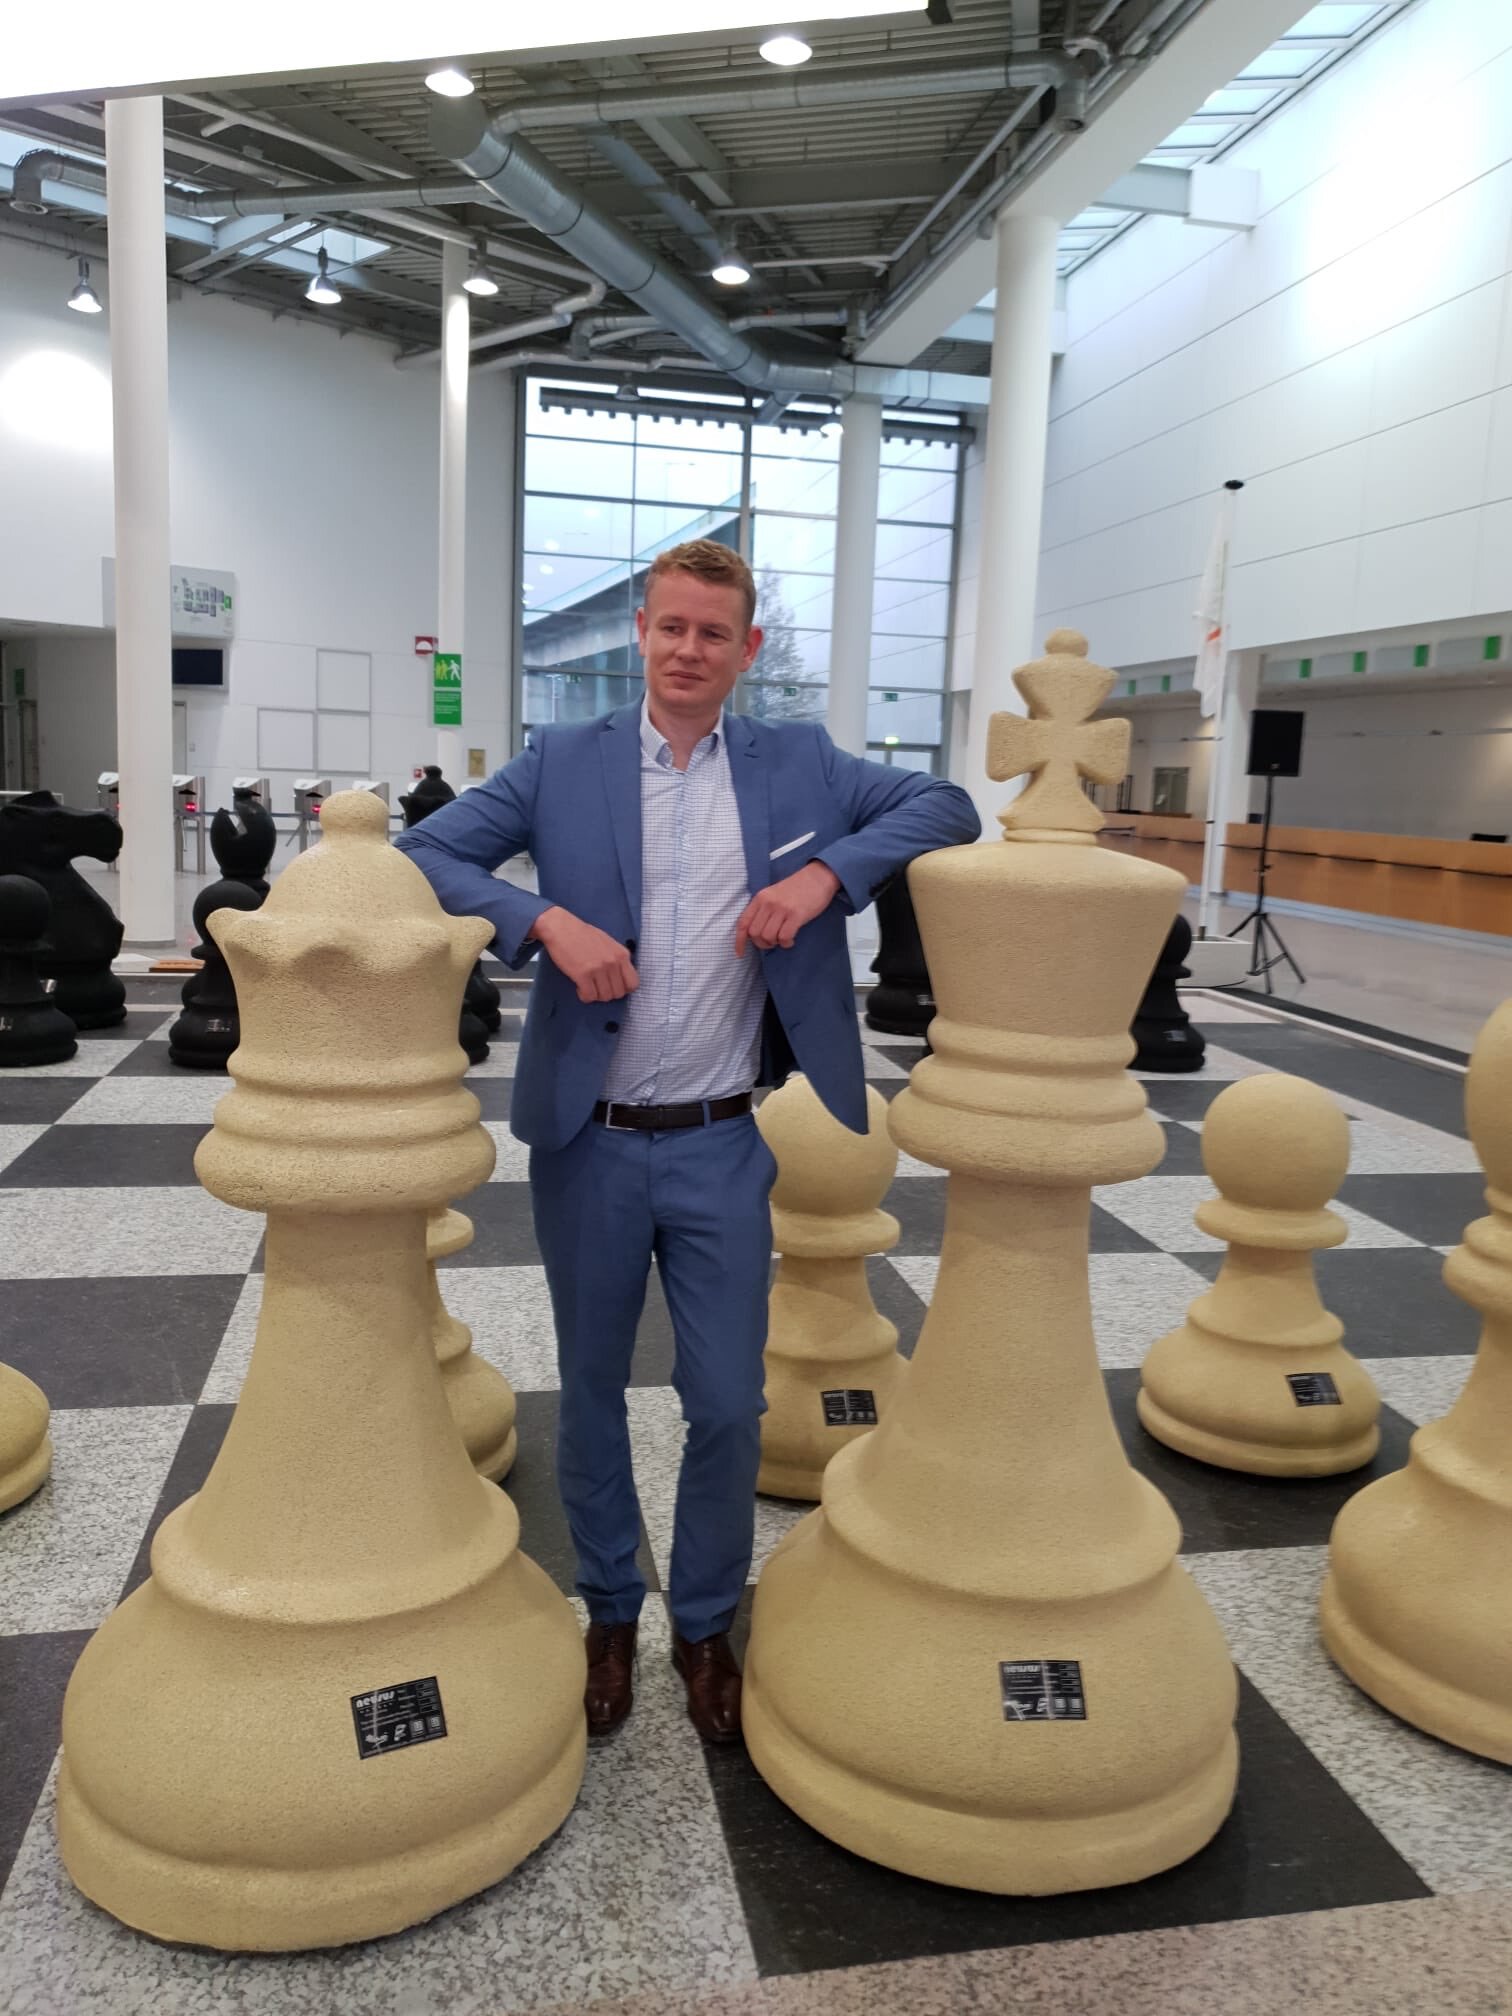 Ep 278- GM Jan Gustafsson- The Popular Chess24 Commentator discusses the  World Championships, Chess Openings, The State of his Chess Game, and his  new Chess Podcast — The Perpetual Chess Podcast